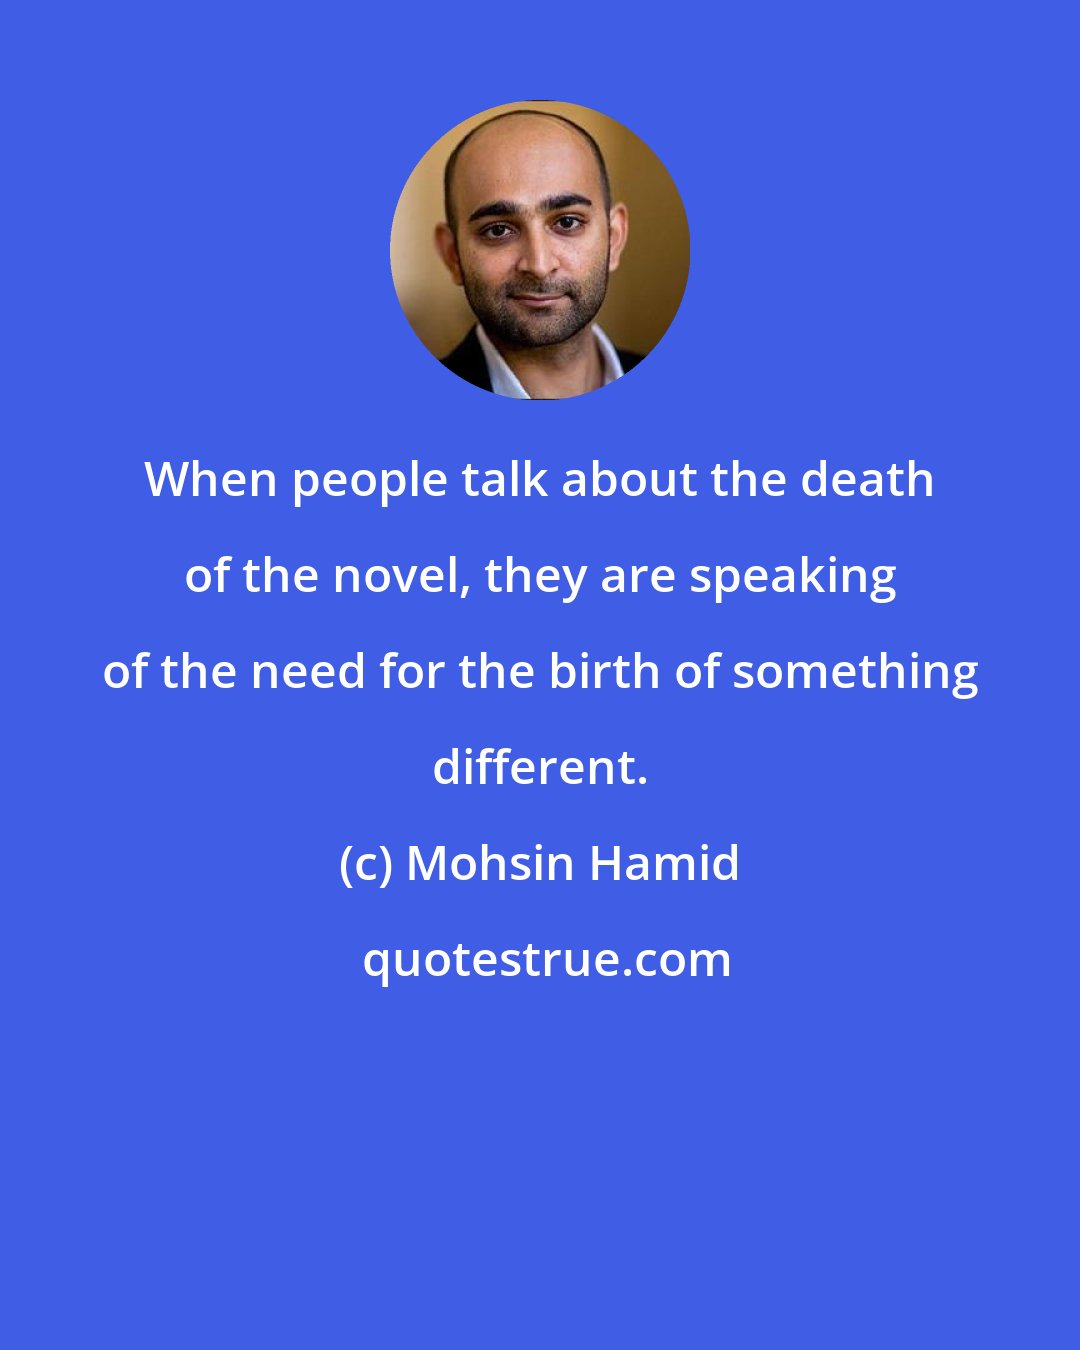 Mohsin Hamid: When people talk about the death of the novel, they are speaking of the need for the birth of something different.